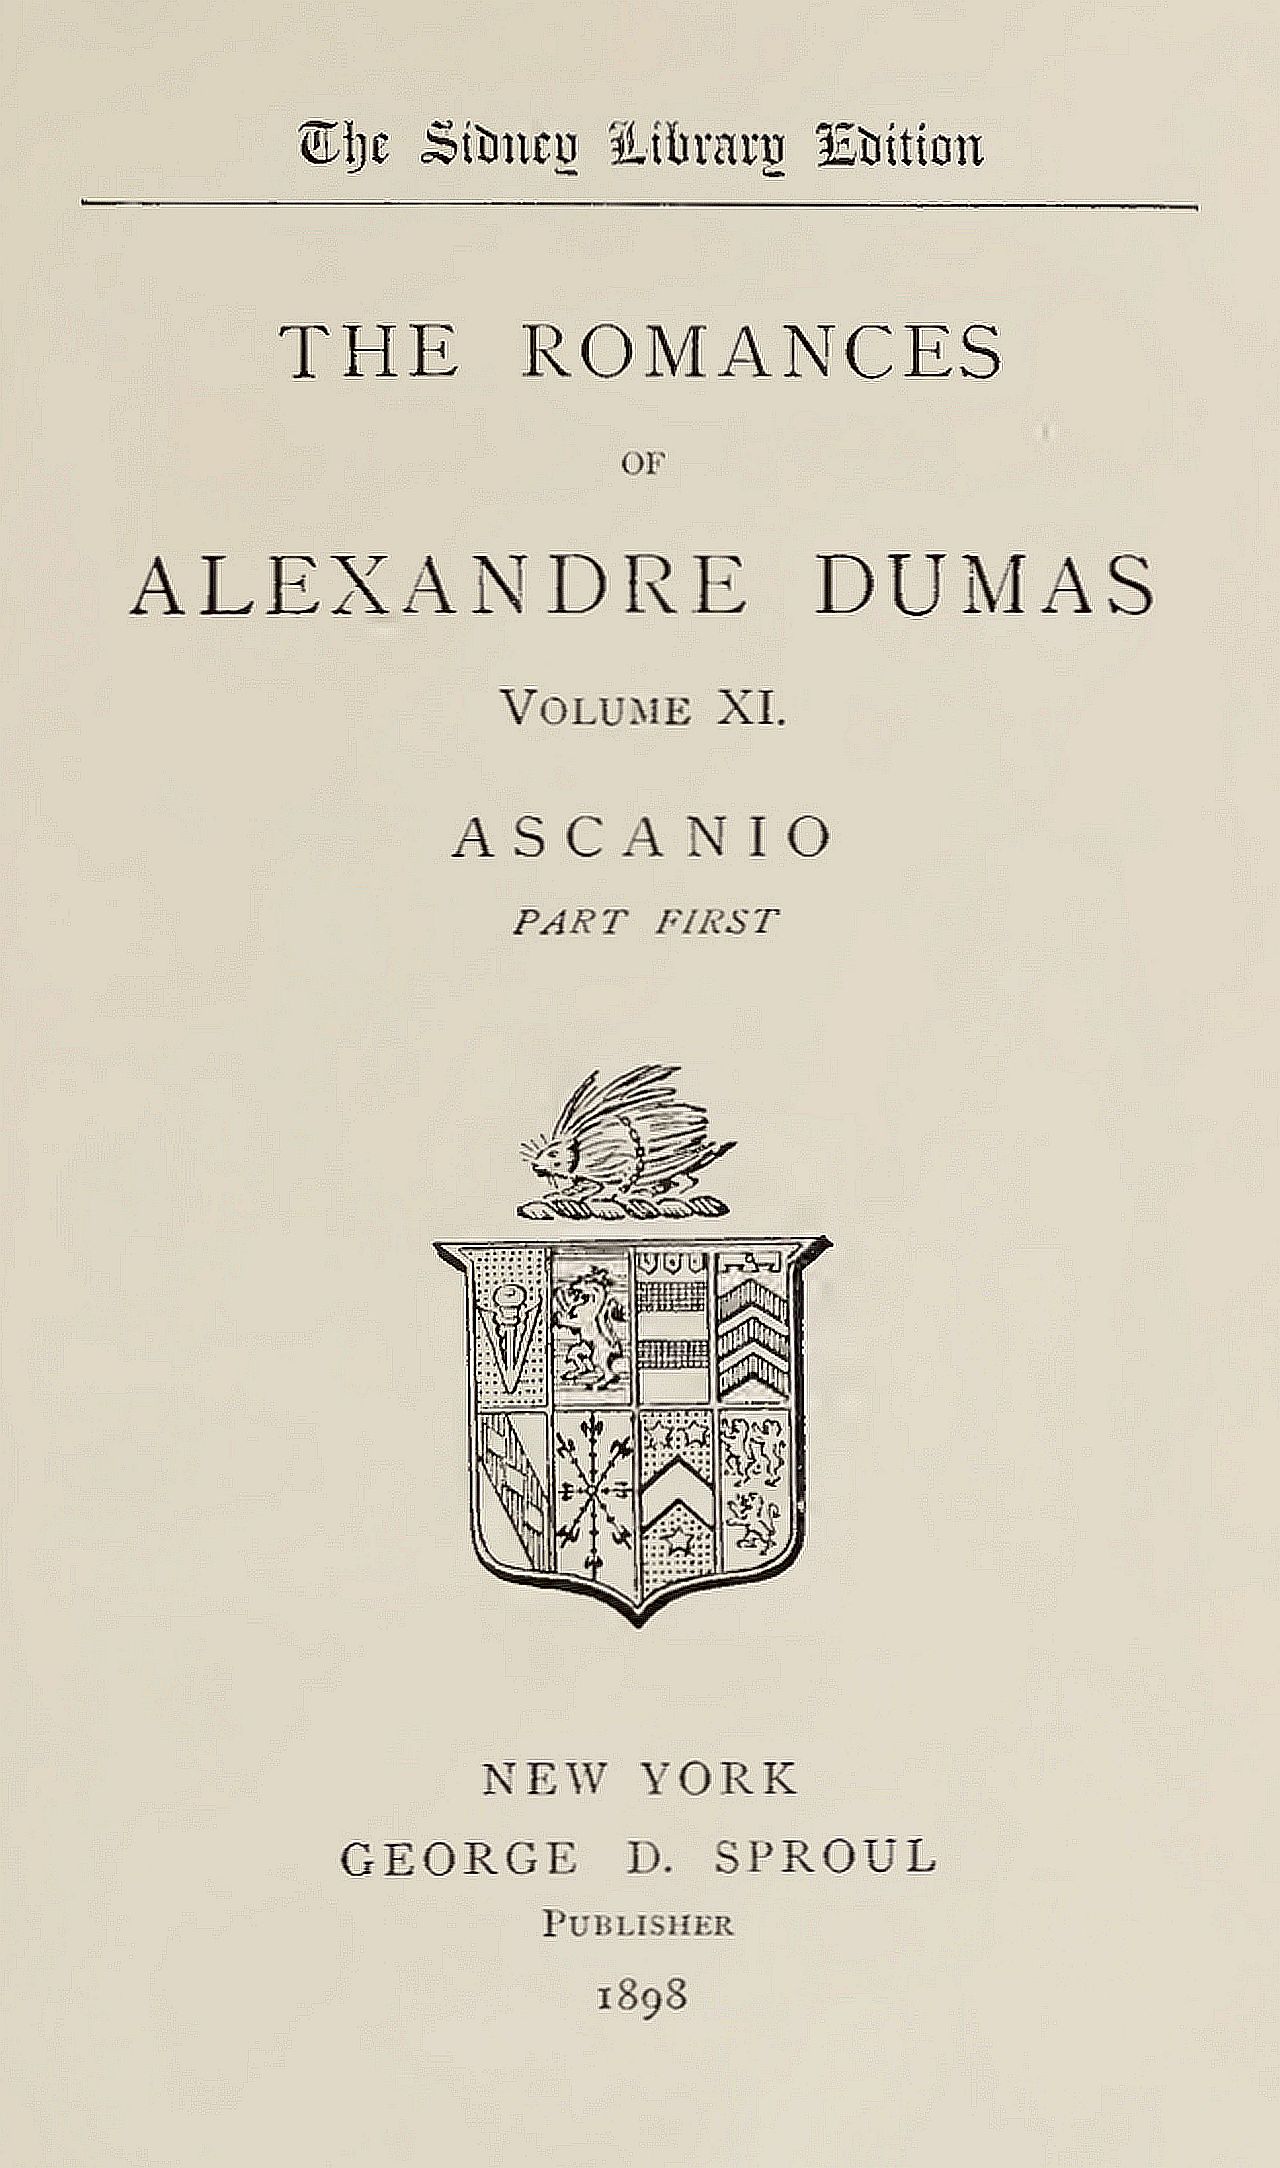 The Project Gutenberg eBook of Ascanio, by Alexandre Dumas. photo